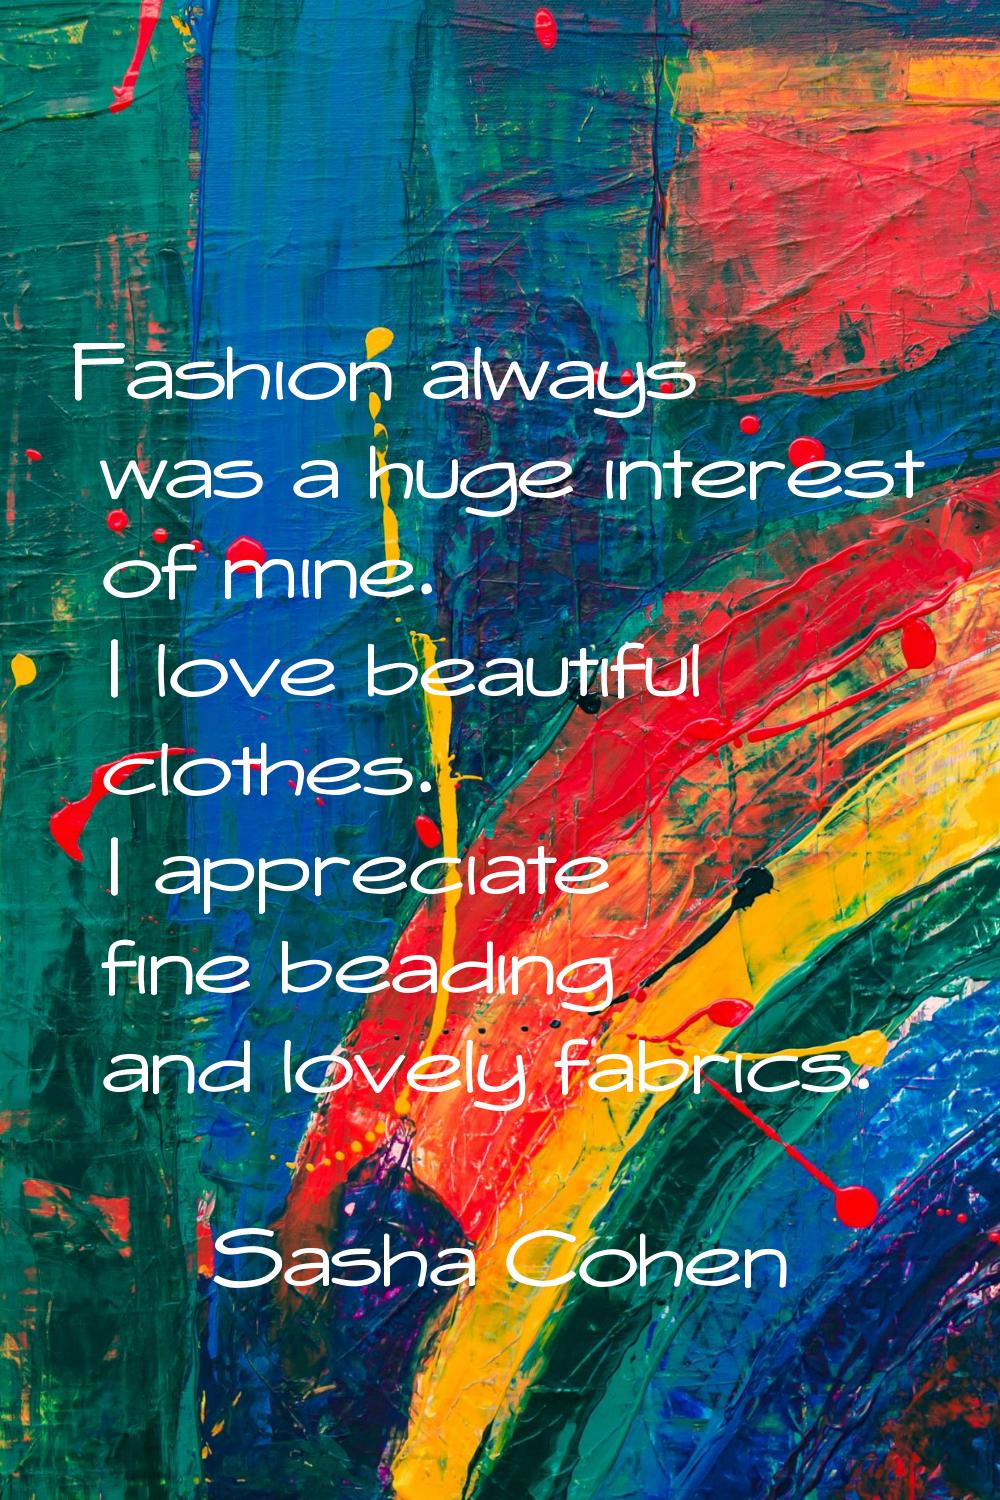 Fashion always was a huge interest of mine. I love beautiful clothes. I appreciate fine beading and